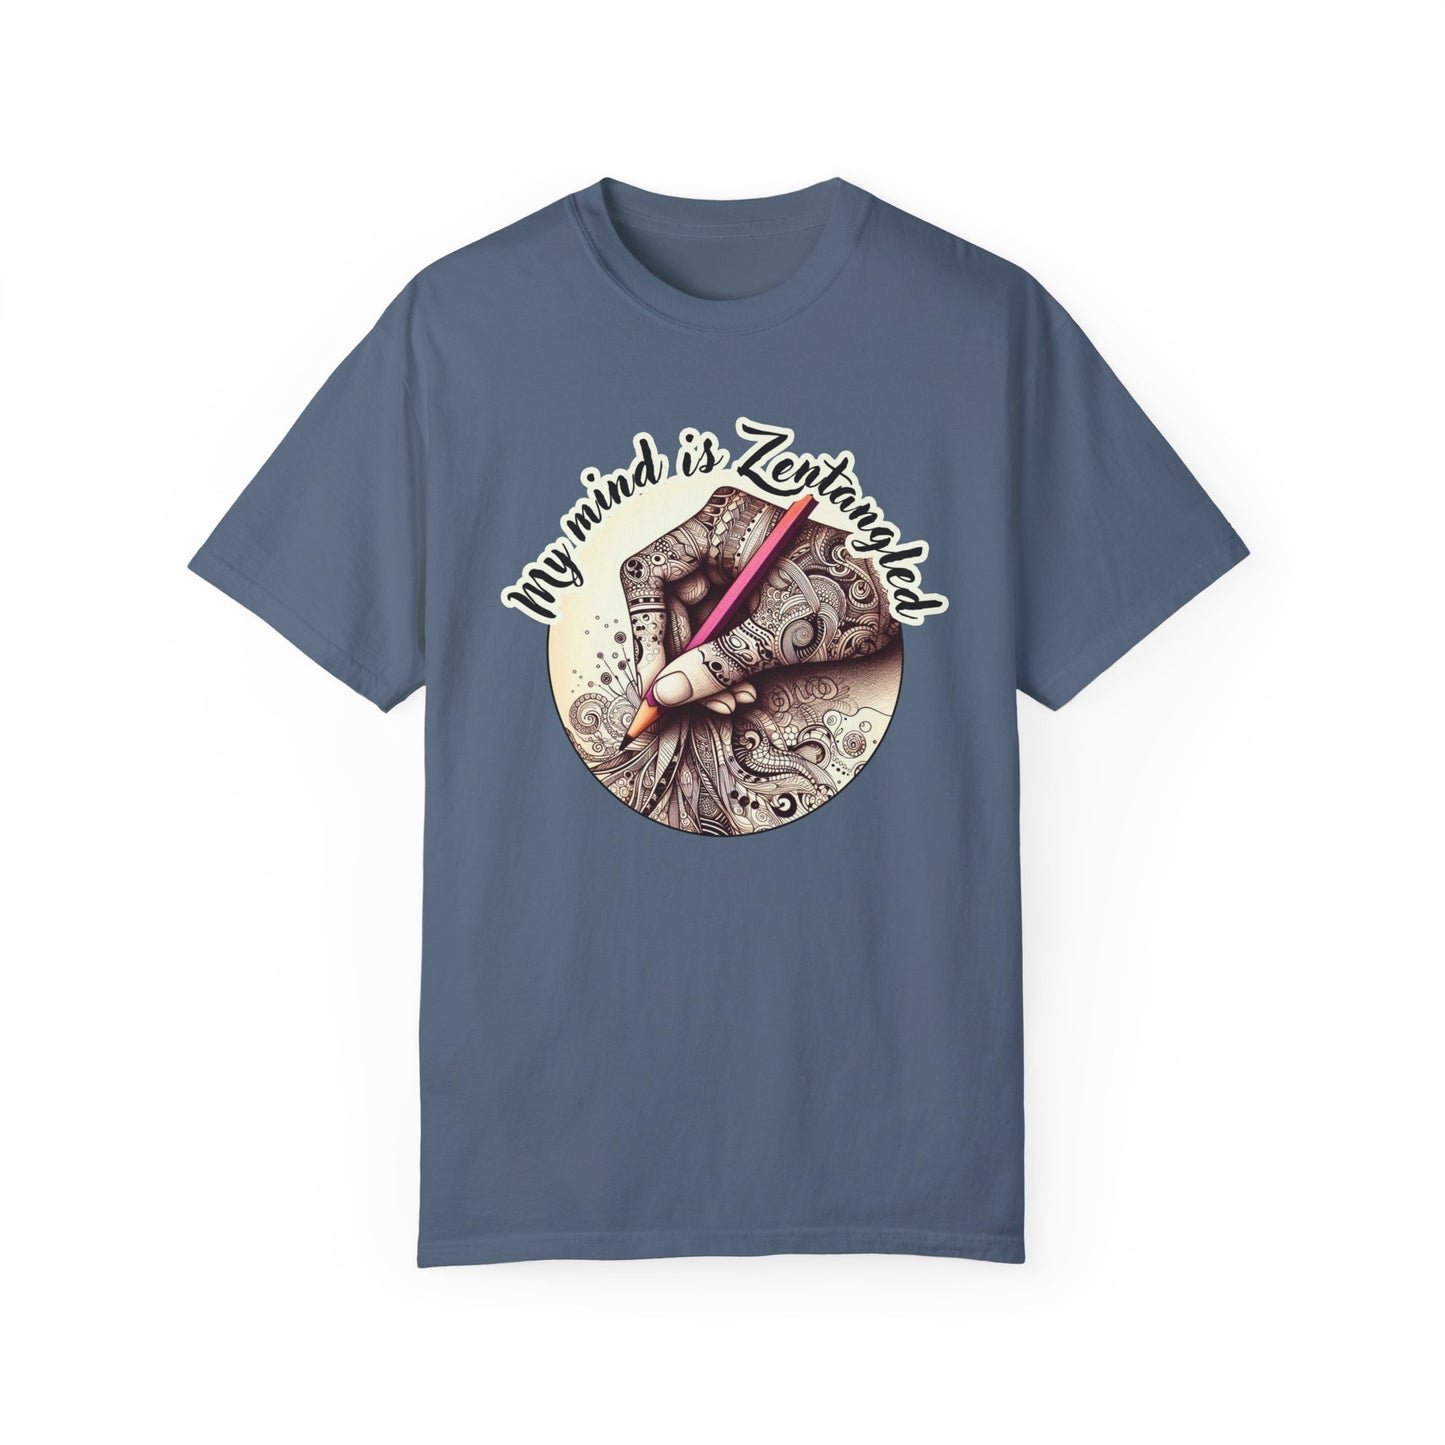 My mind is zentangled T-Shirt